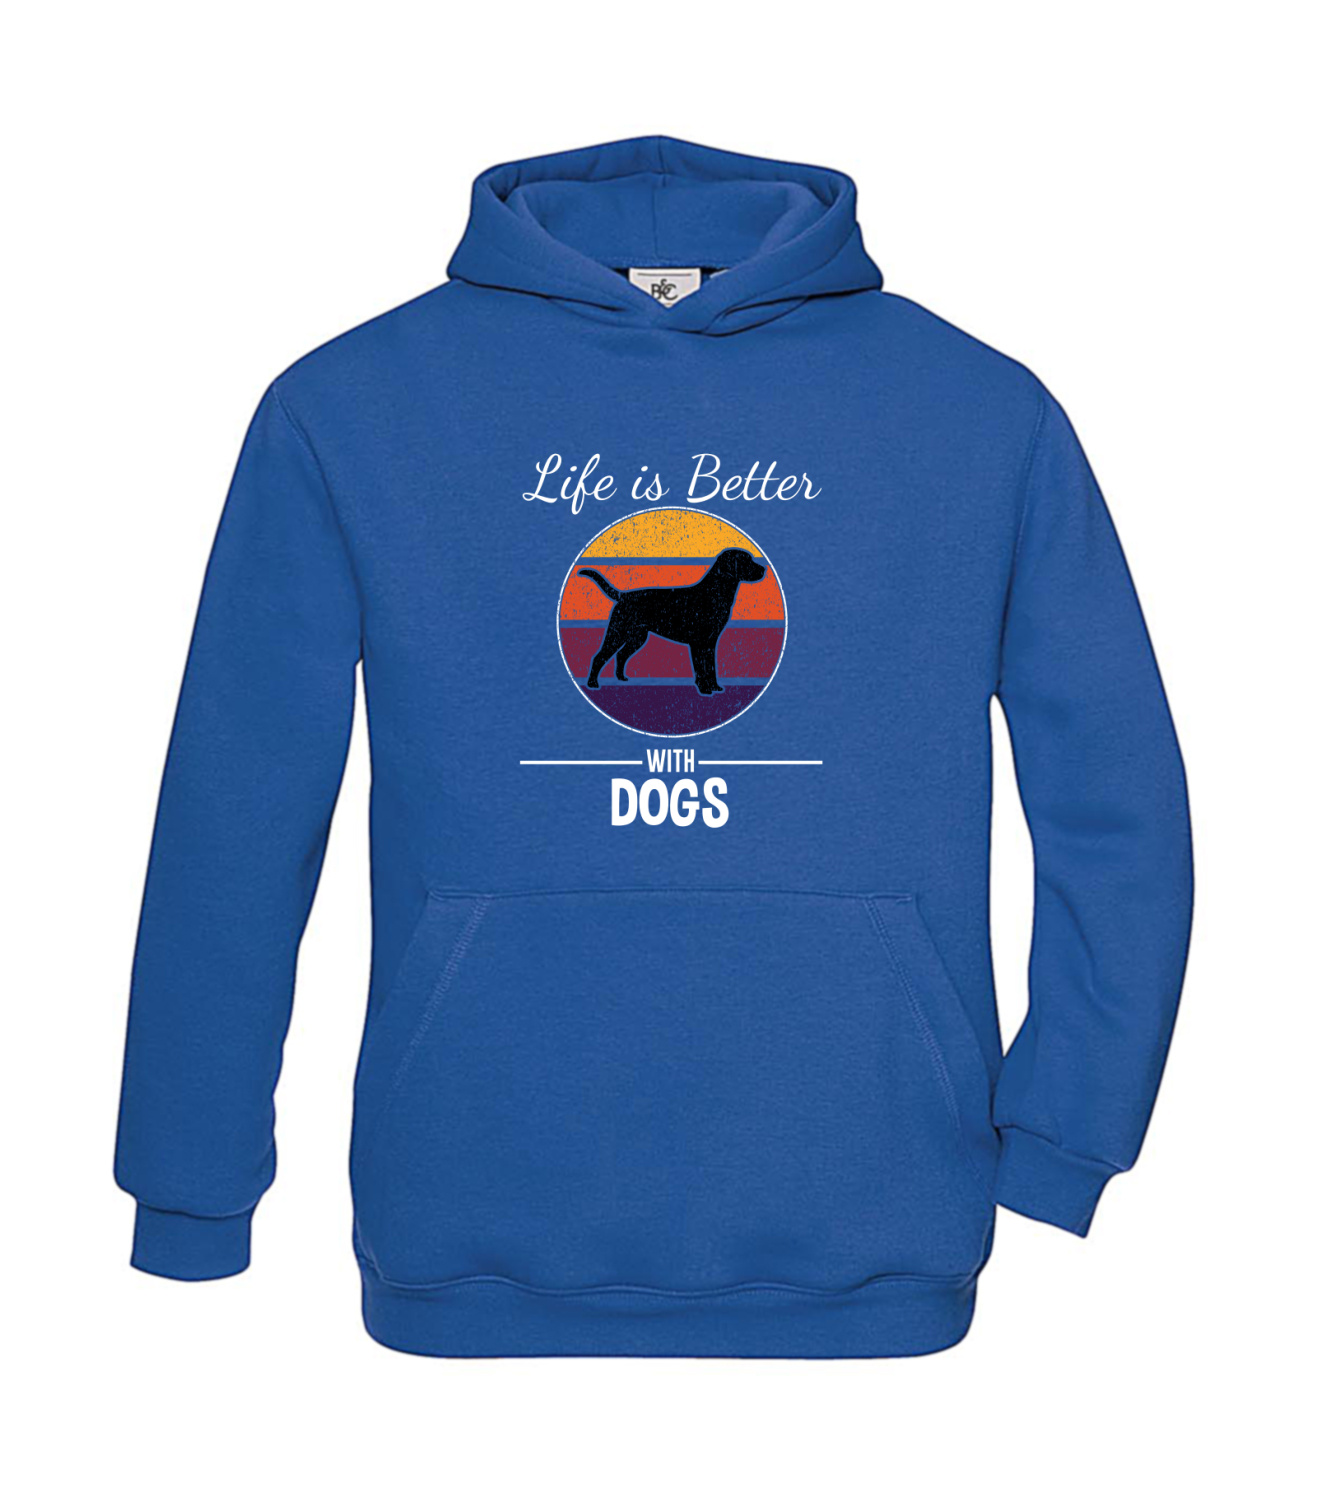 Hoodie Kinder Hunde - Life is Better with Dogs